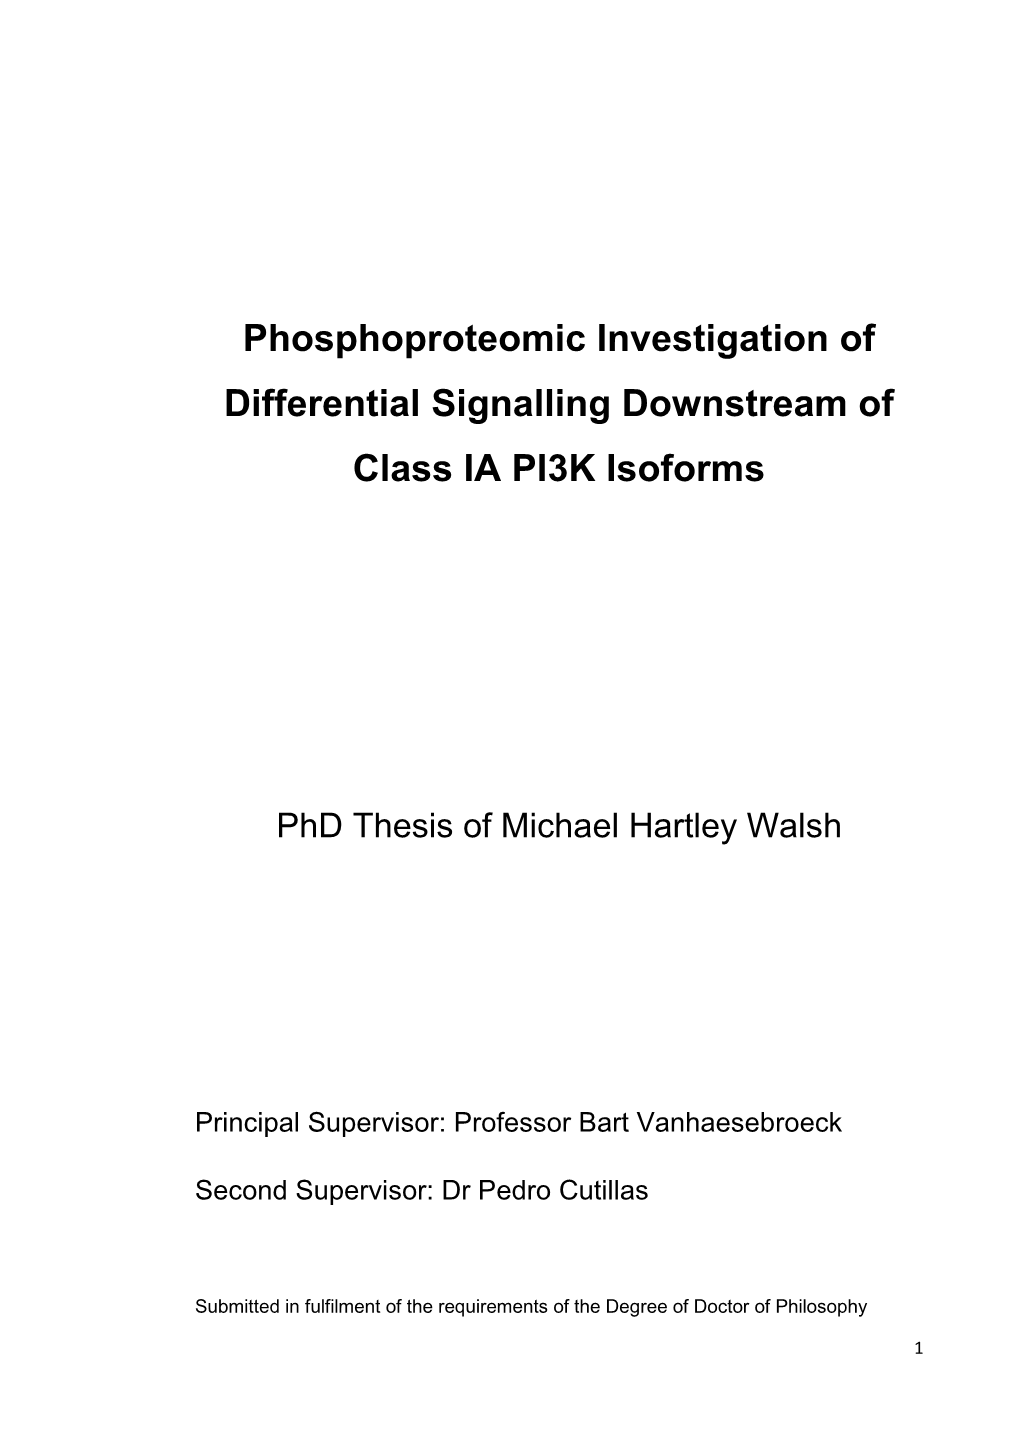 Phosphoproteomic Investigation of Differential Signalling Downstream of Class IA PI3K Isoforms